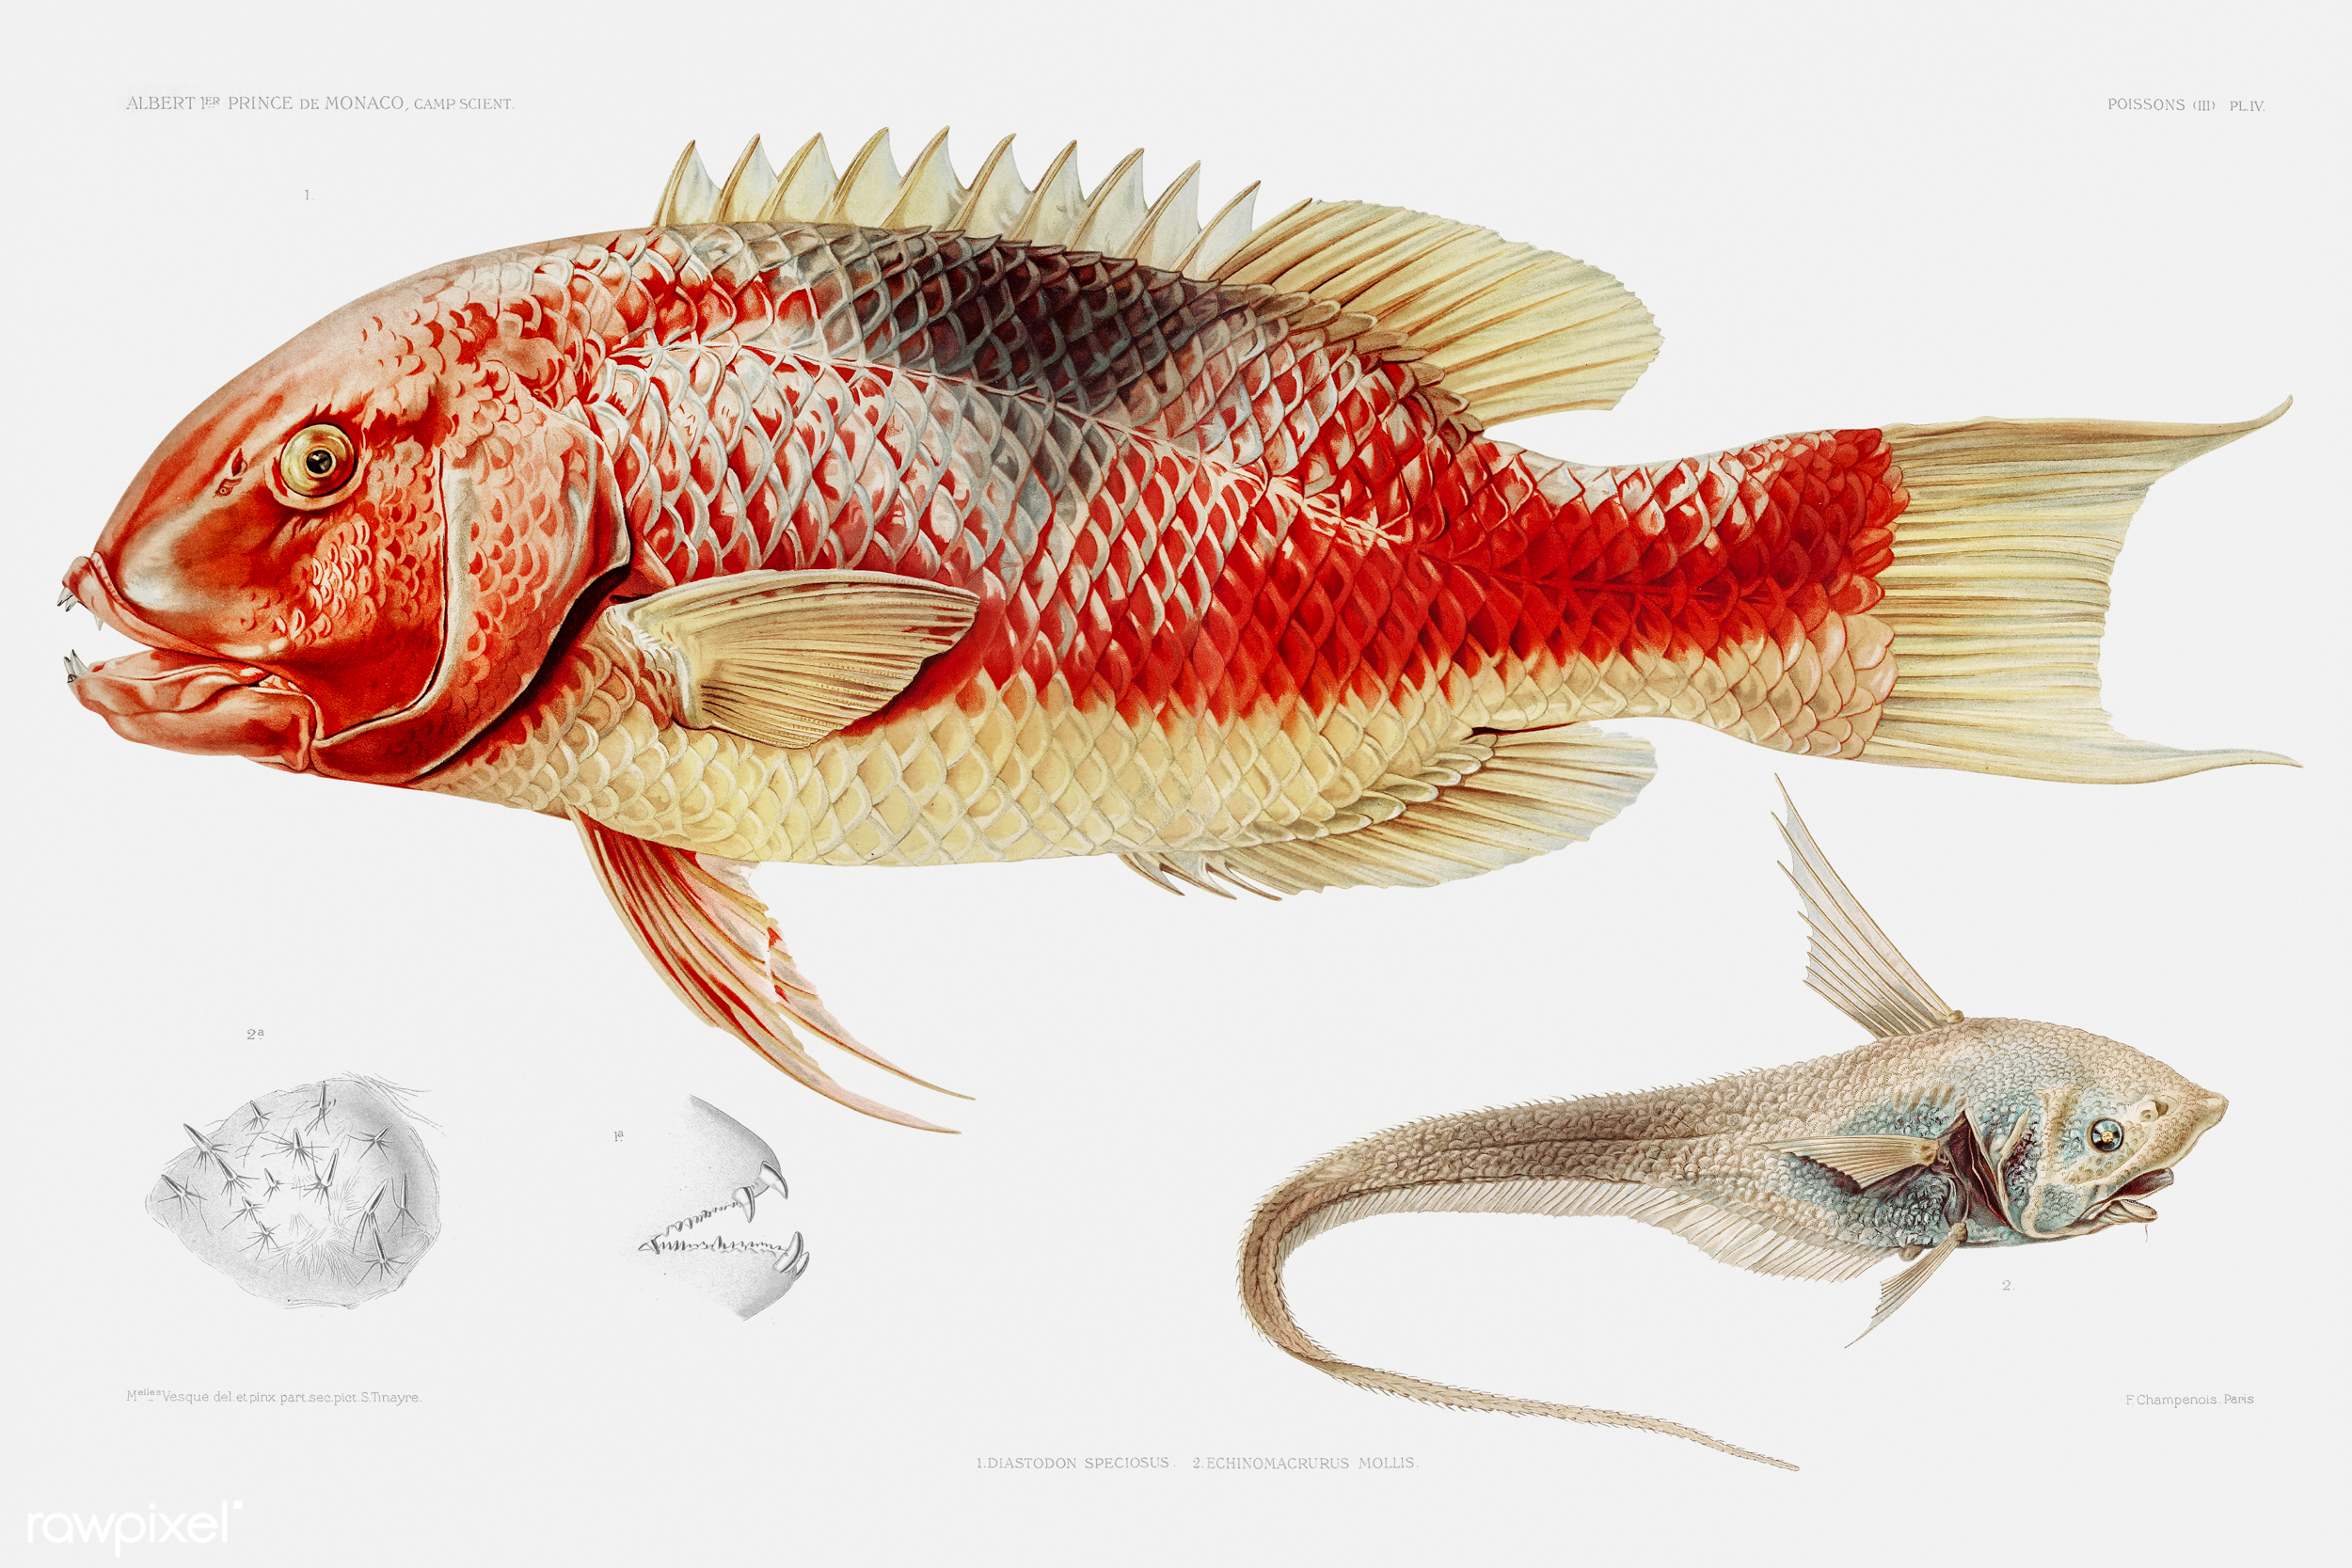 File:Hogfish and a ray finned fish poster.jpg - Wikimedia Commons